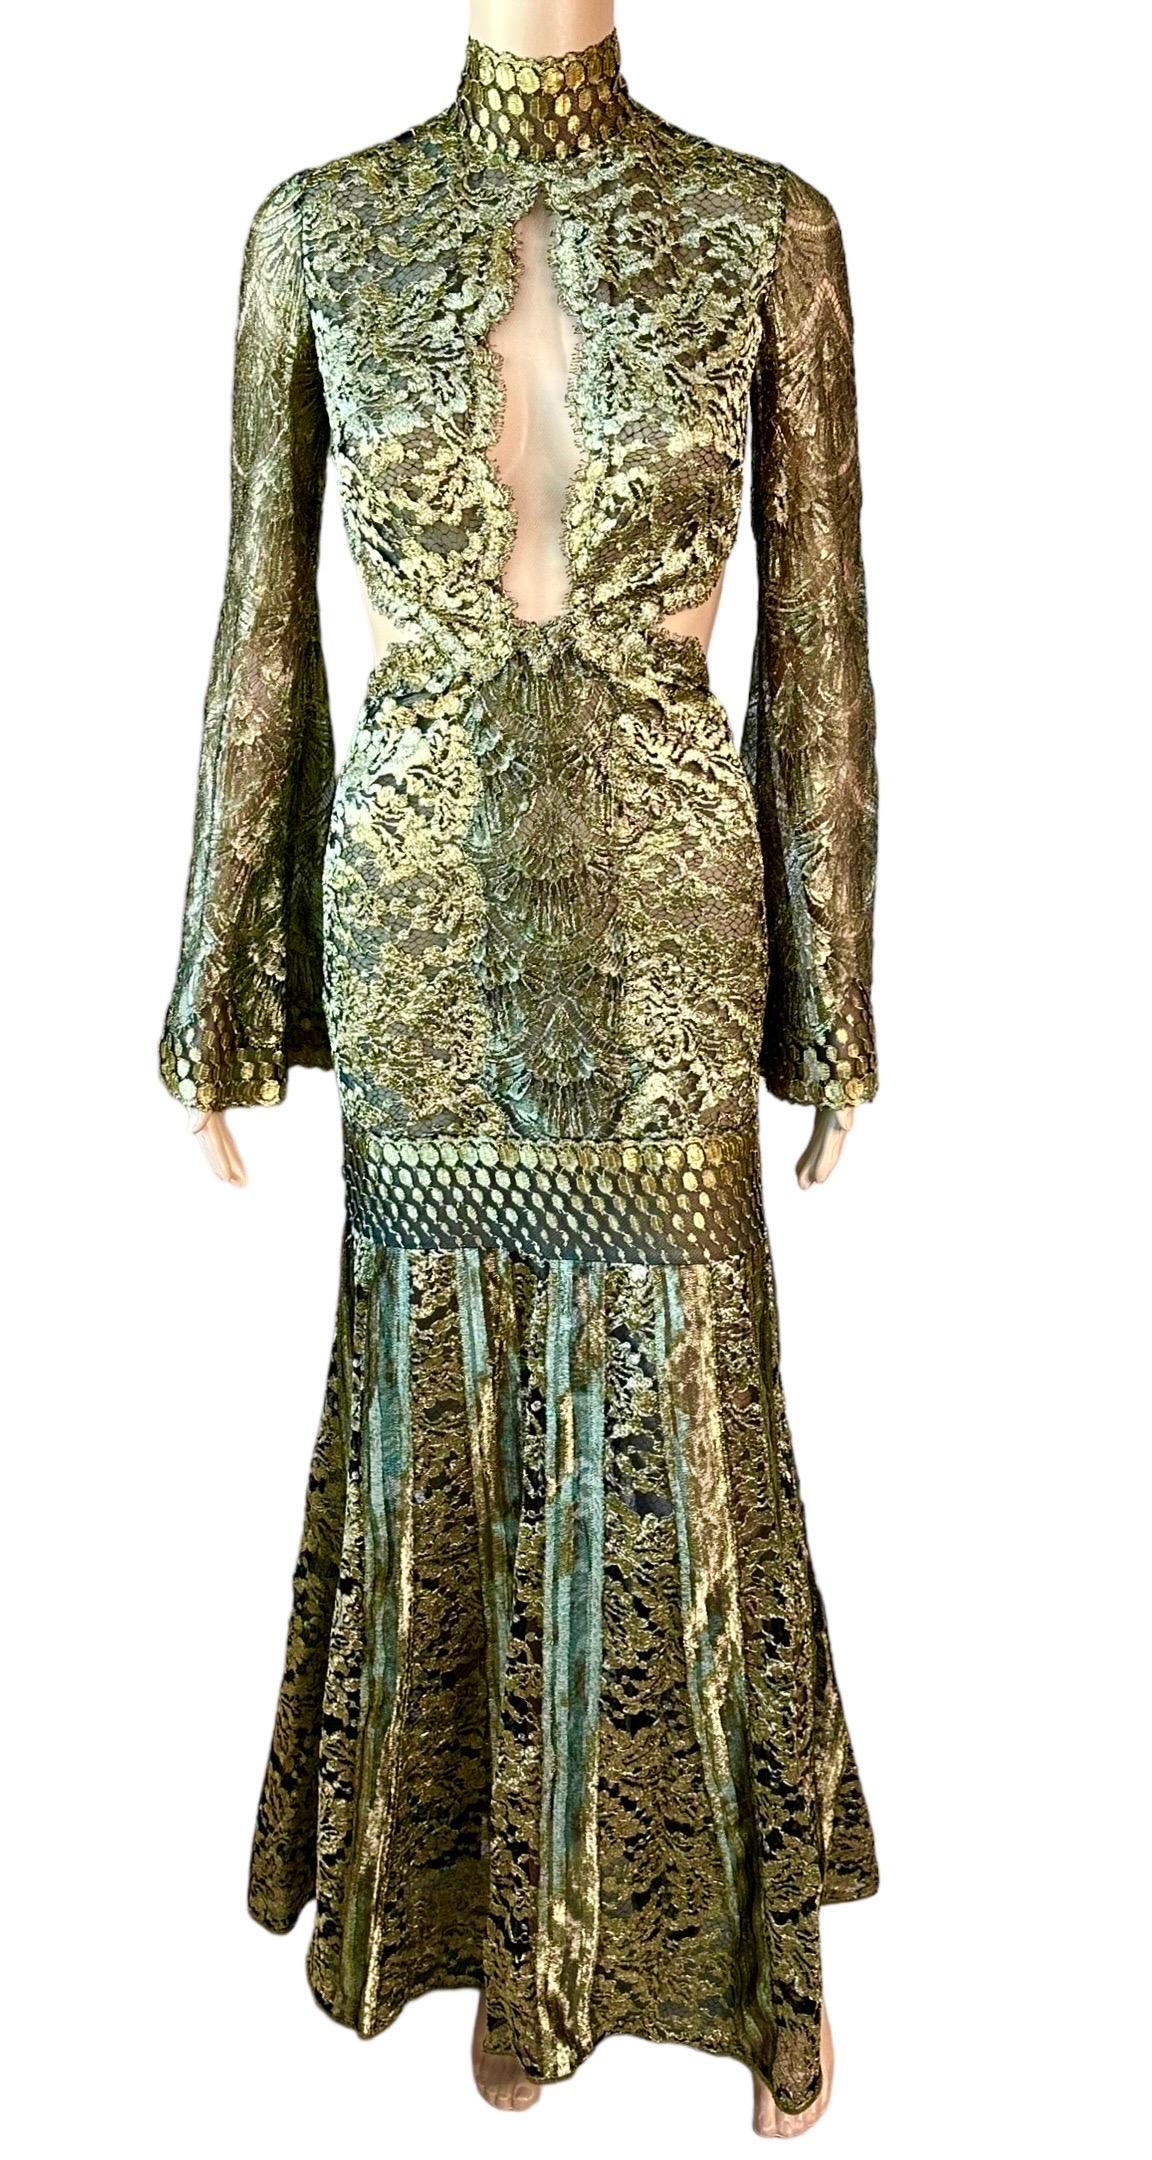 Roberto Cavalli F/W 2016 Runway Gold Sheer Lace Evening Dress Gown For Sale 6